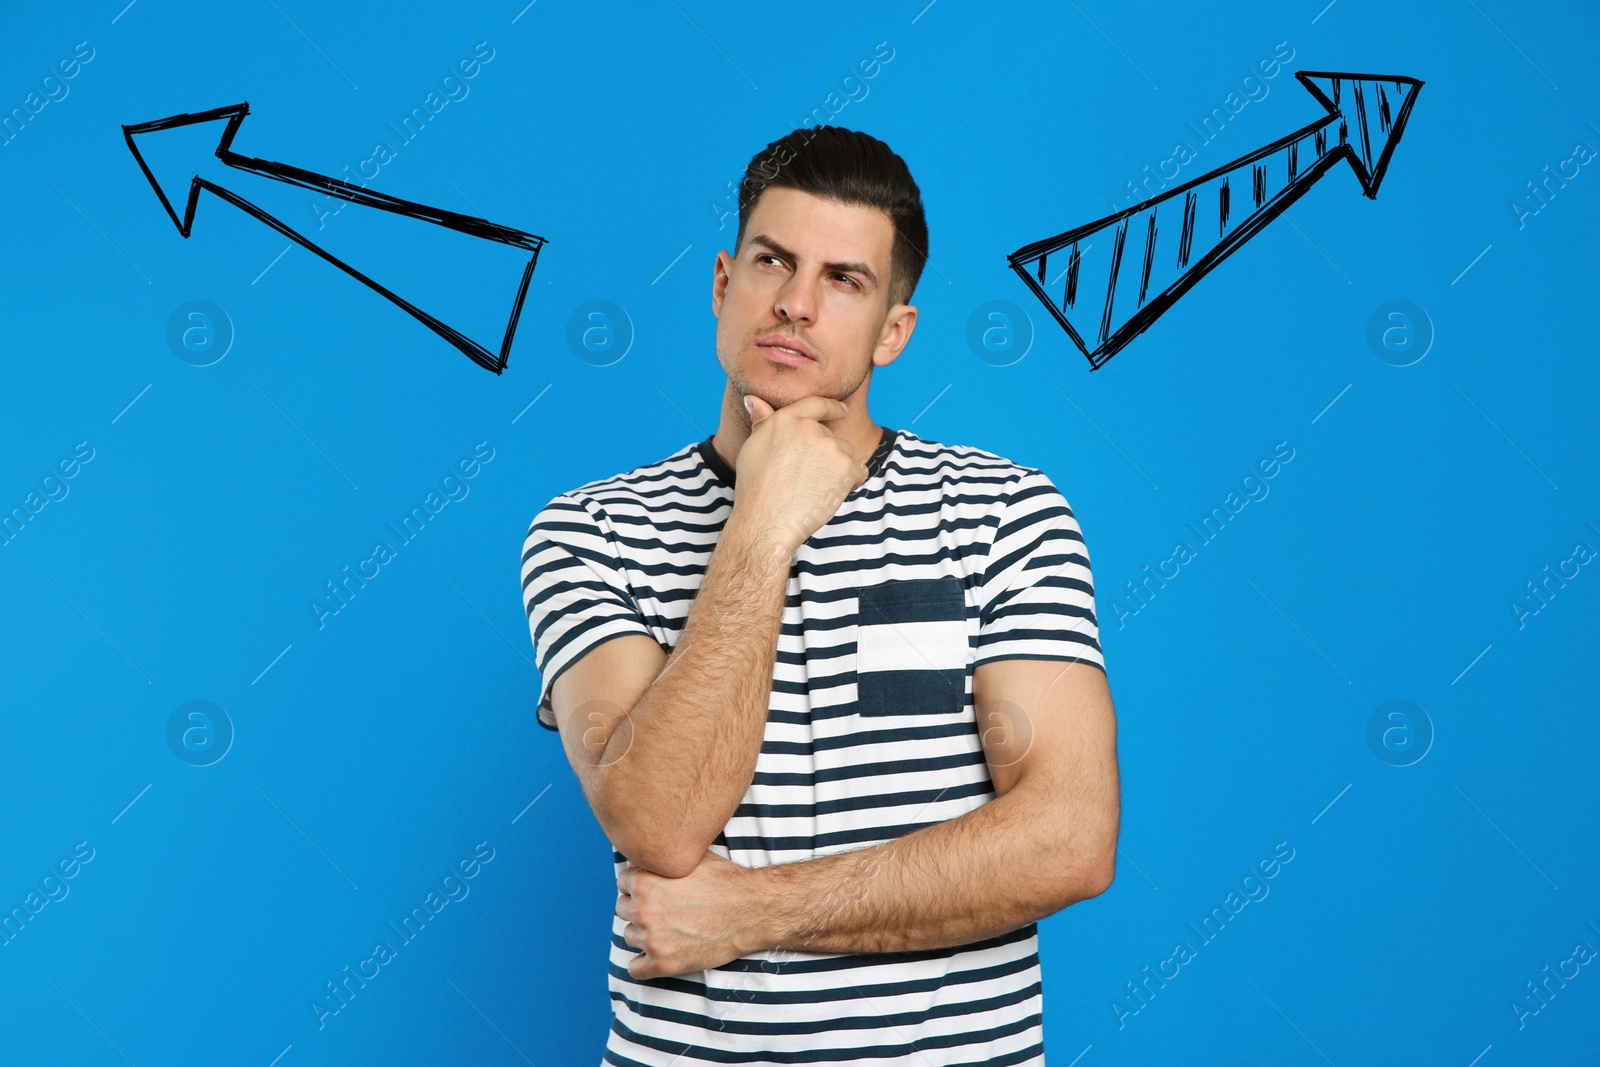 Image of Pensive man standing near blue wall with arrows